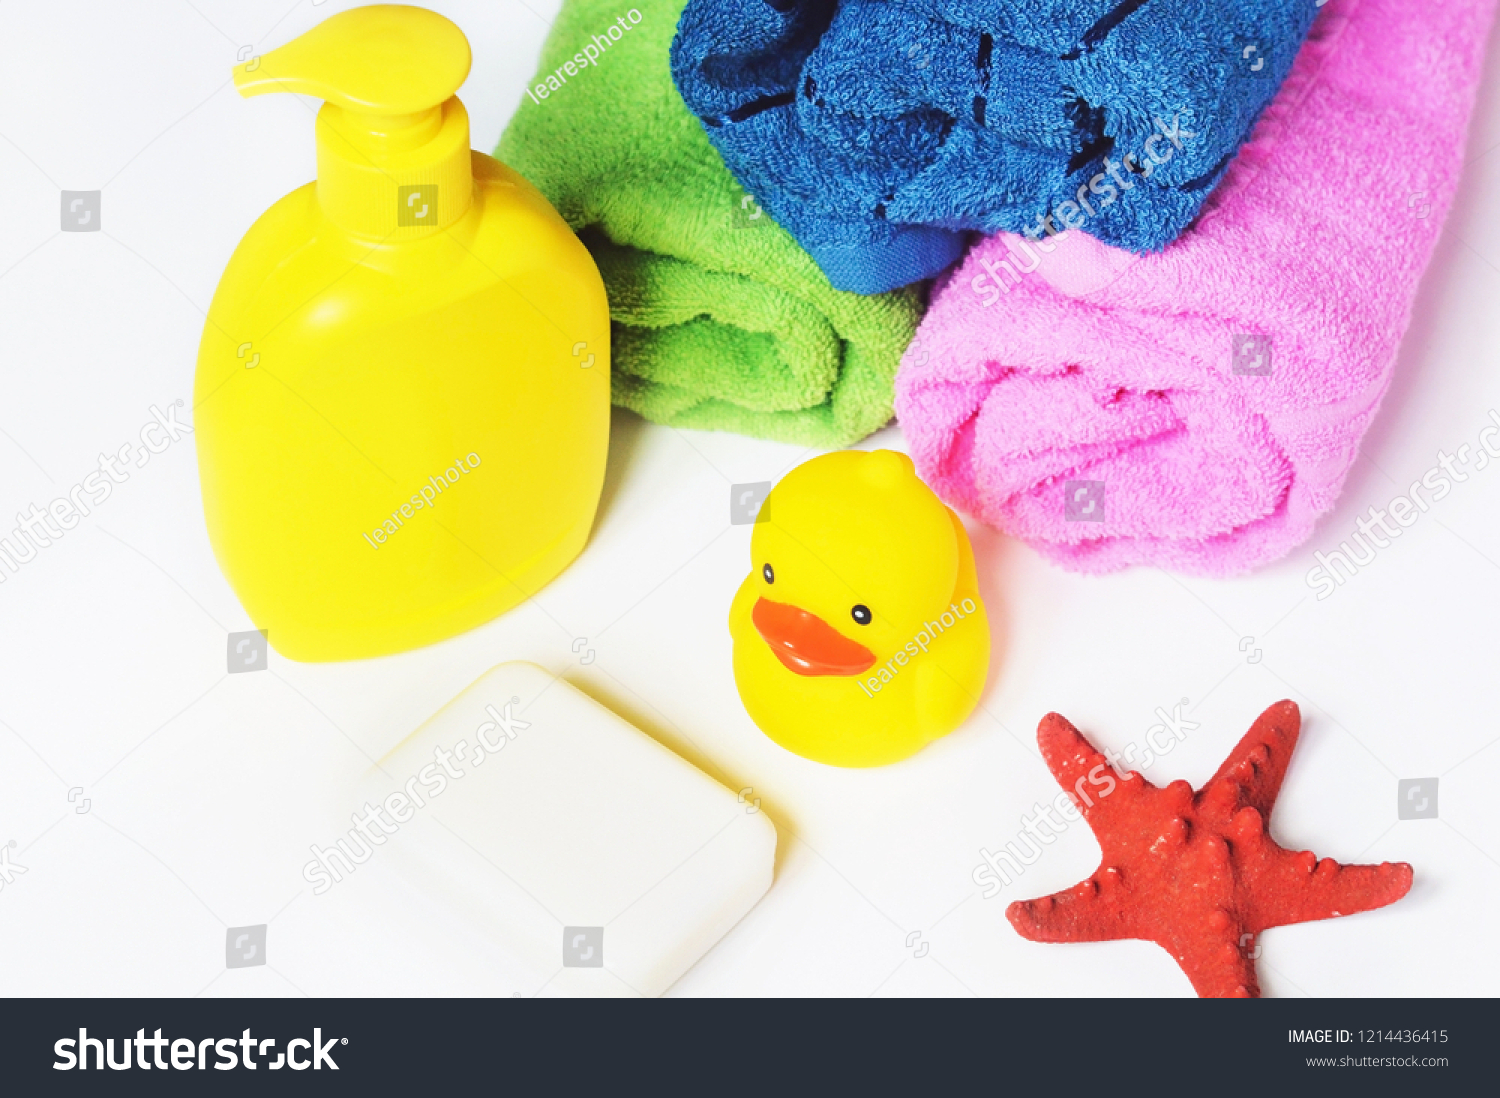 Download Yellow Liquid Soap Packaging Green Blue Stock Photo Edit Now 1214436415 Yellowimages Mockups